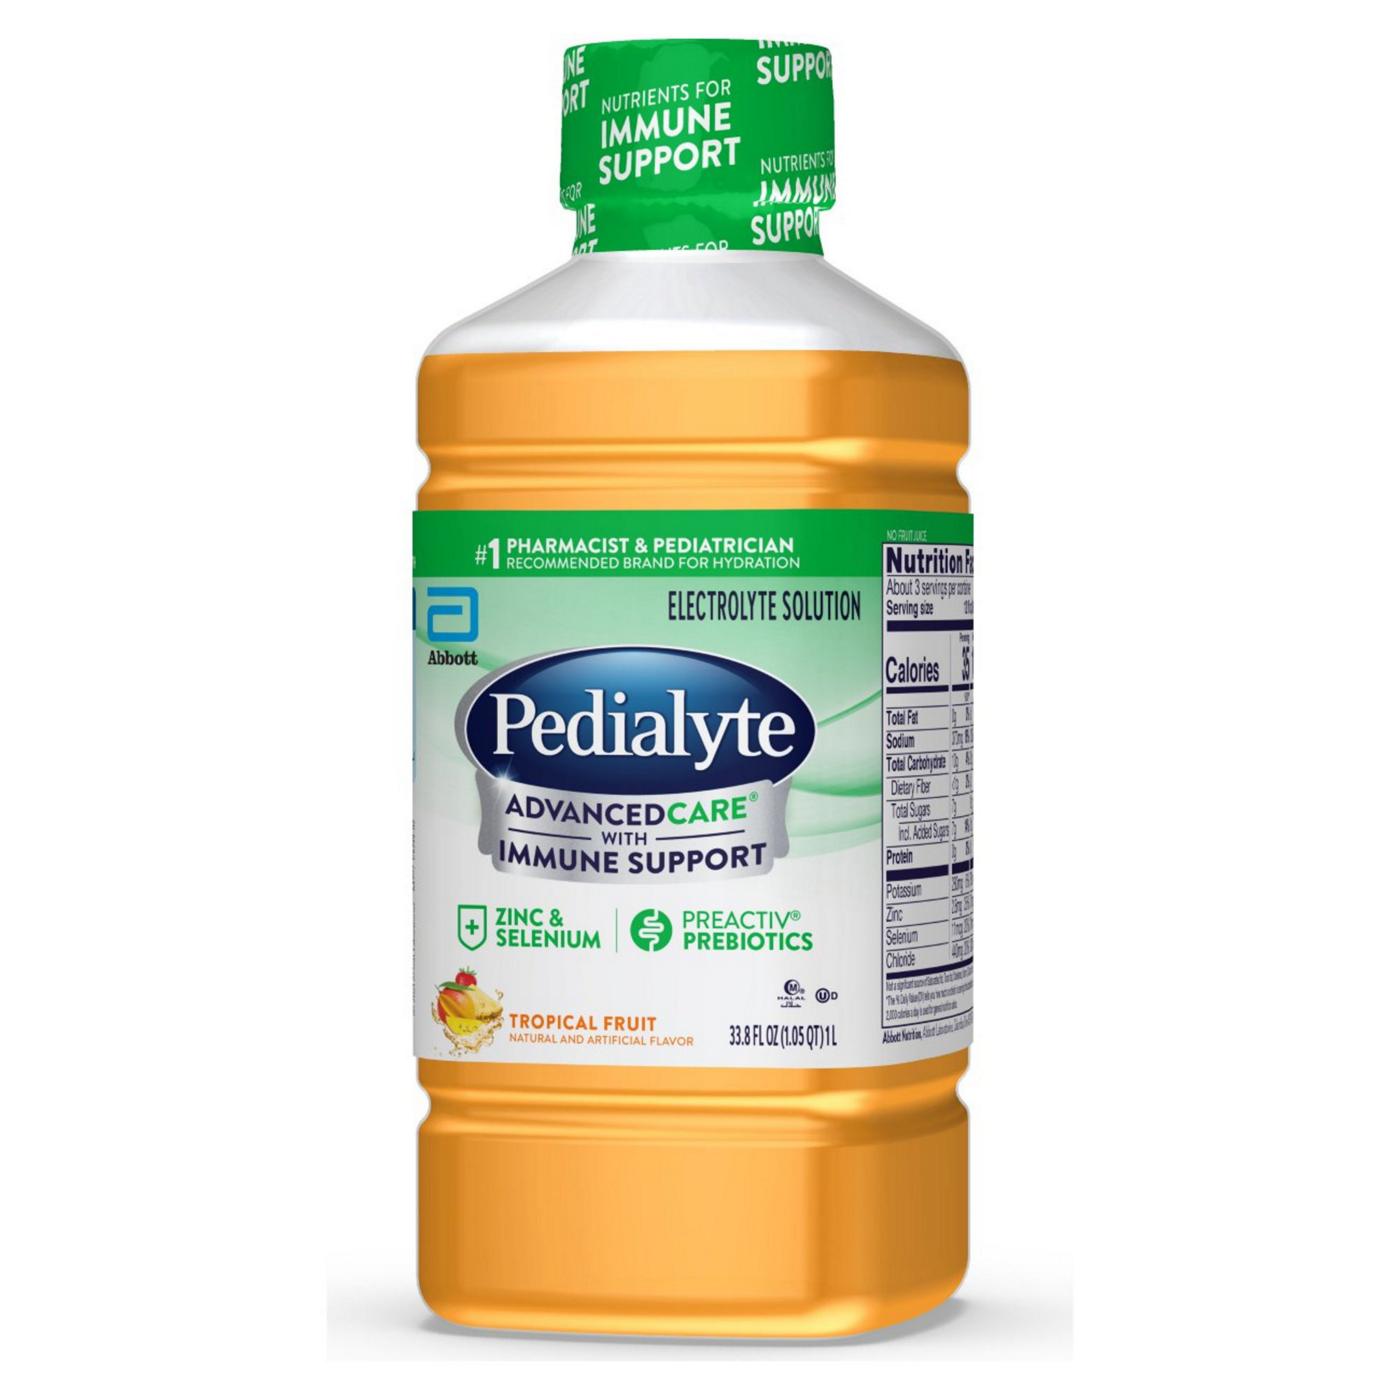 Pedialyte AdvancedCare Electrolyte Solution - Tropical Fruit; image 5 of 8